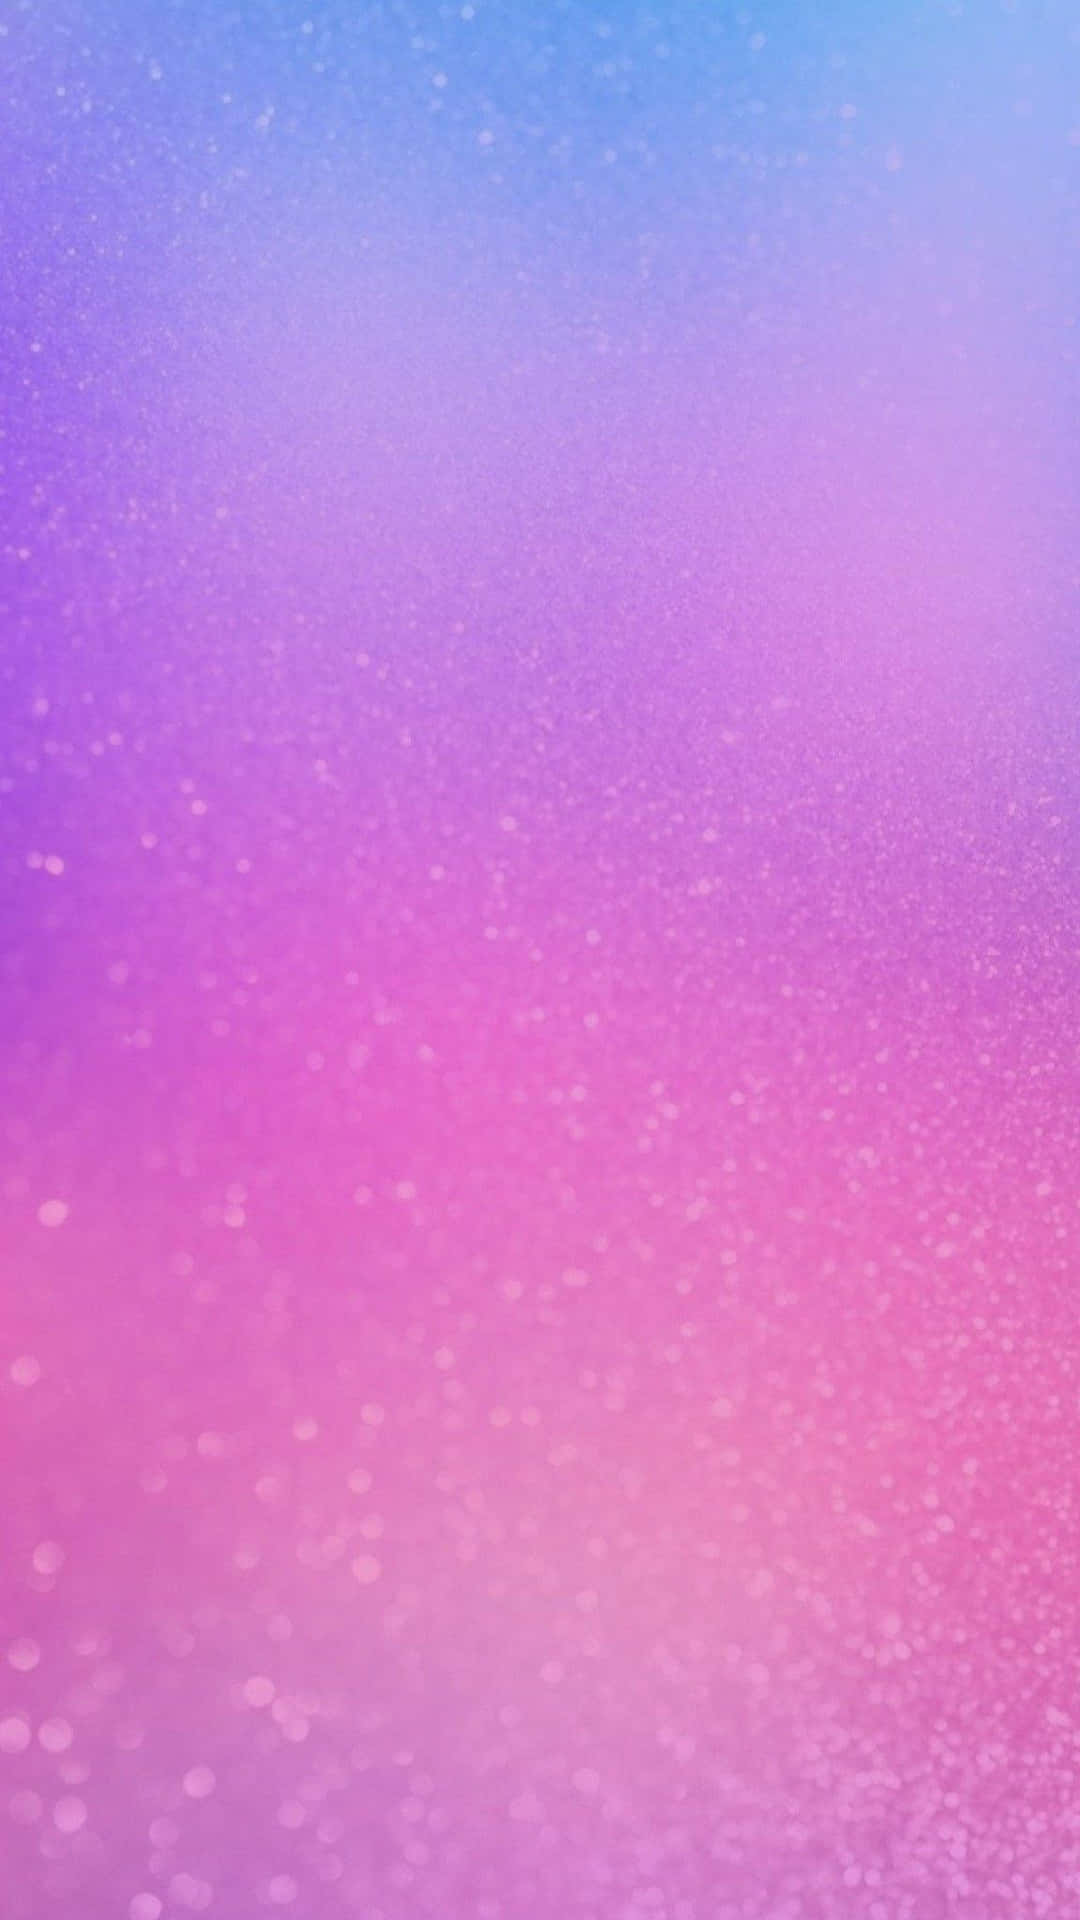 Show Off Your Style With This Pastel Purple Iphone Background